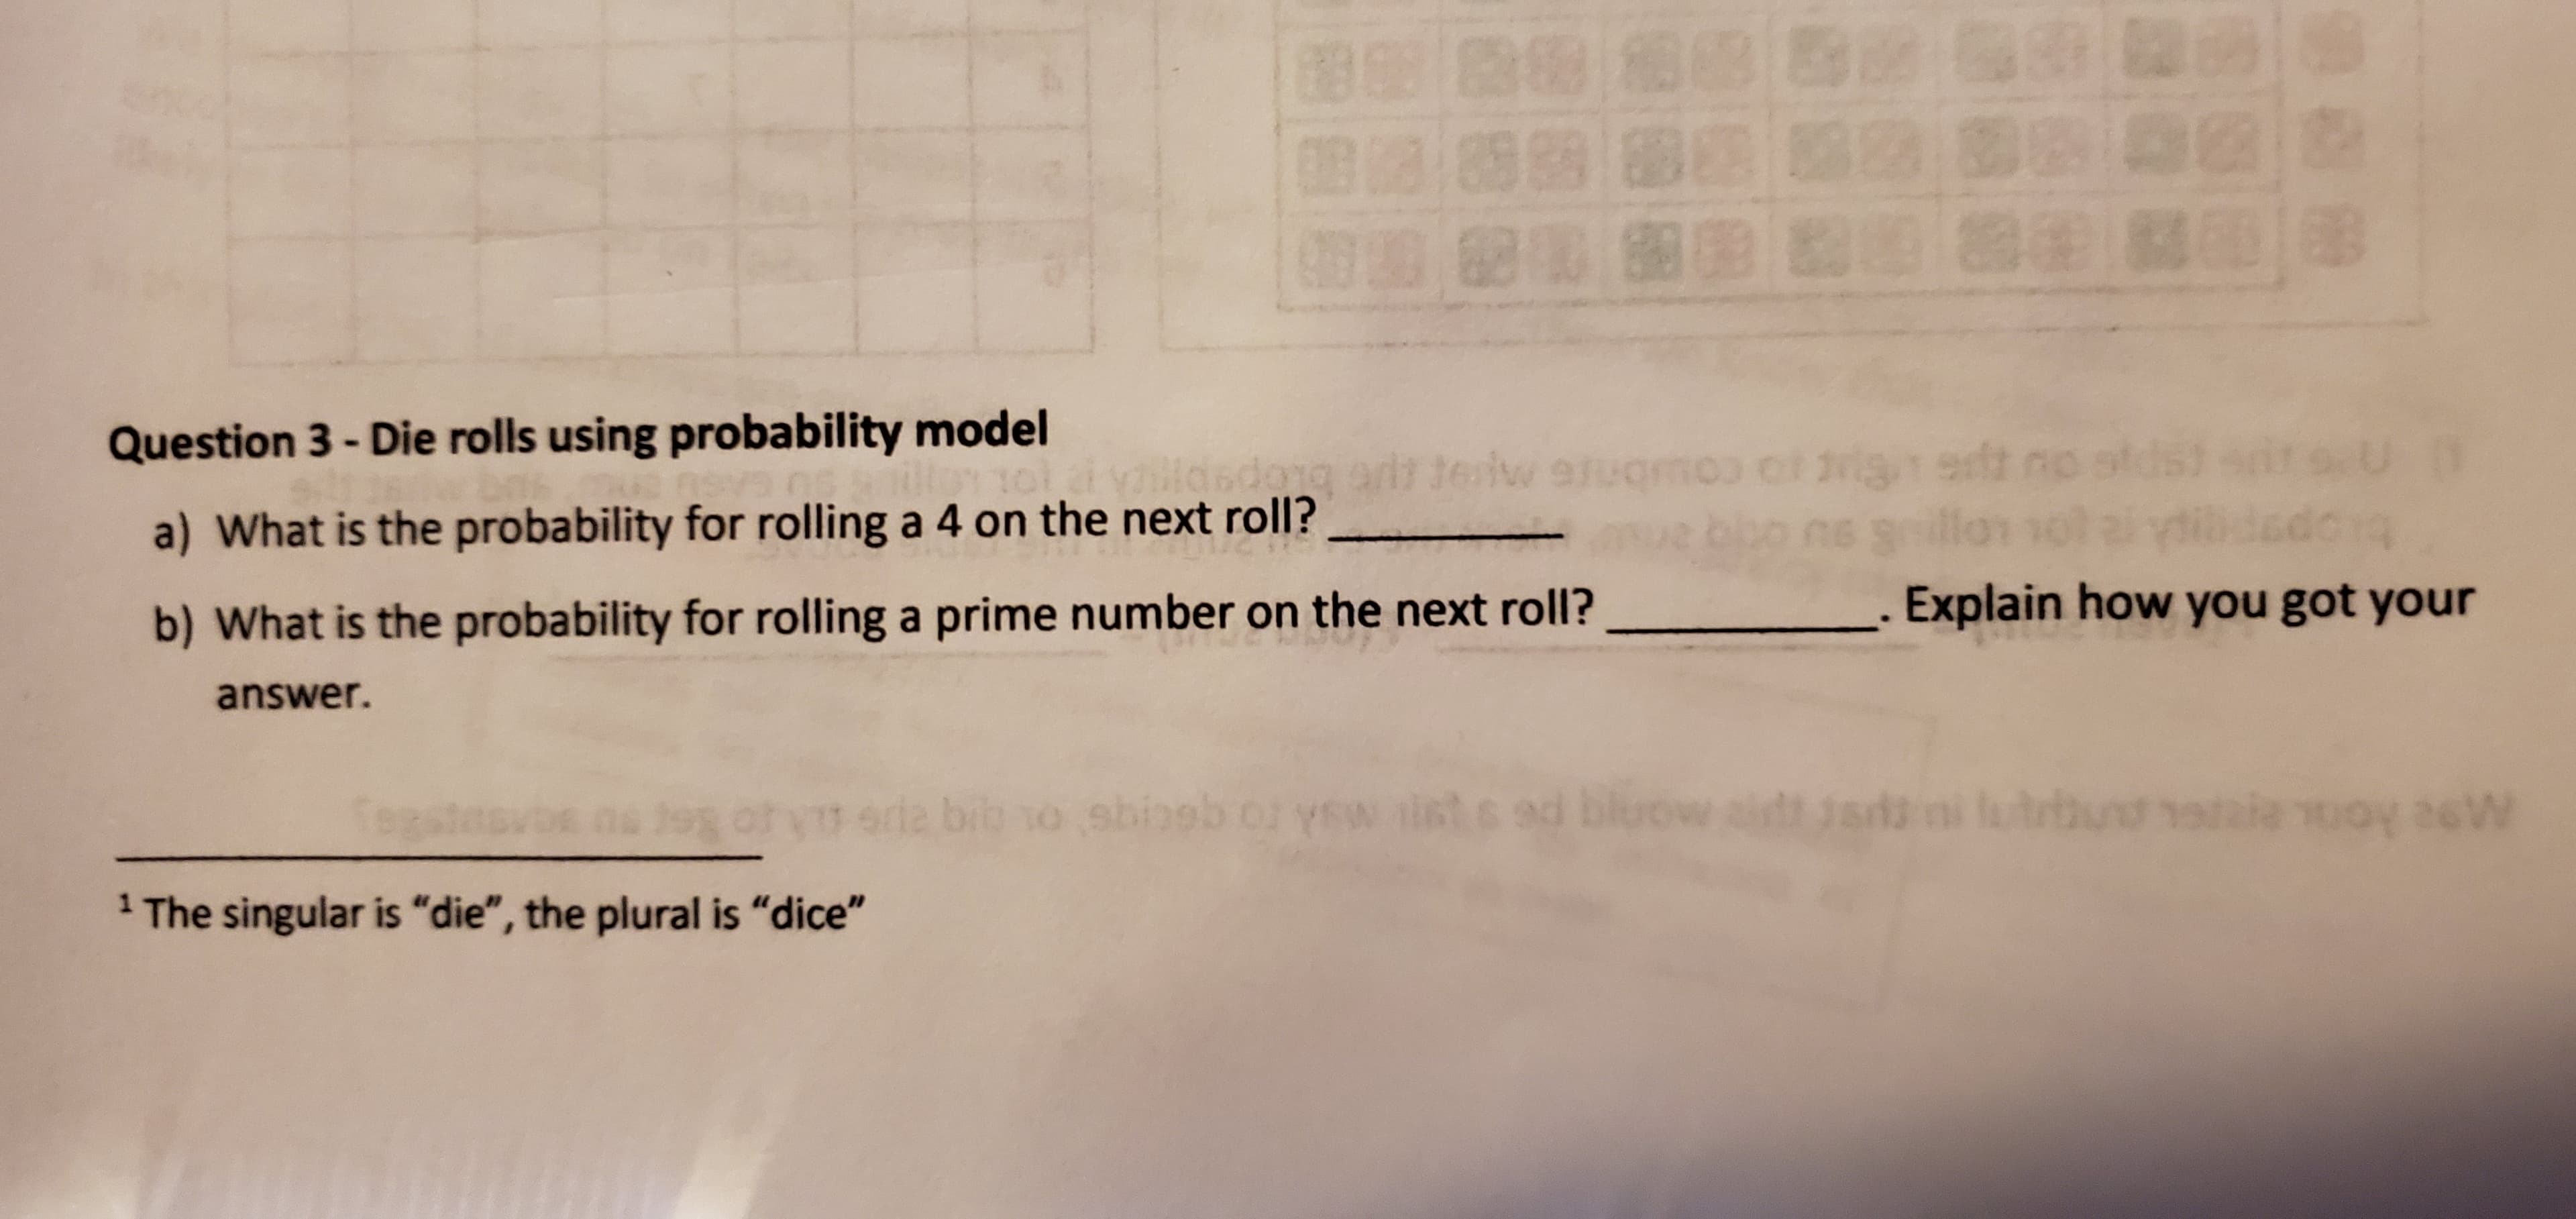 B
63/89 89 88 8
82 00 88 9 Bae aB
B as
Question 3-Die rolls using probability model
oigedt no
0 g
sdong
iw
vs
a) What is the probability for rolling a 4 on the next roll?
Explain how you got your
b) What is the probability for rolling a prime number on the next roll?
answer.
s2
utlay
sd2 bib o sbioob or ysw ilst s ed bluow it
26W
19 ot.
YEW
1 The singular is "die", the plural is "dice"
